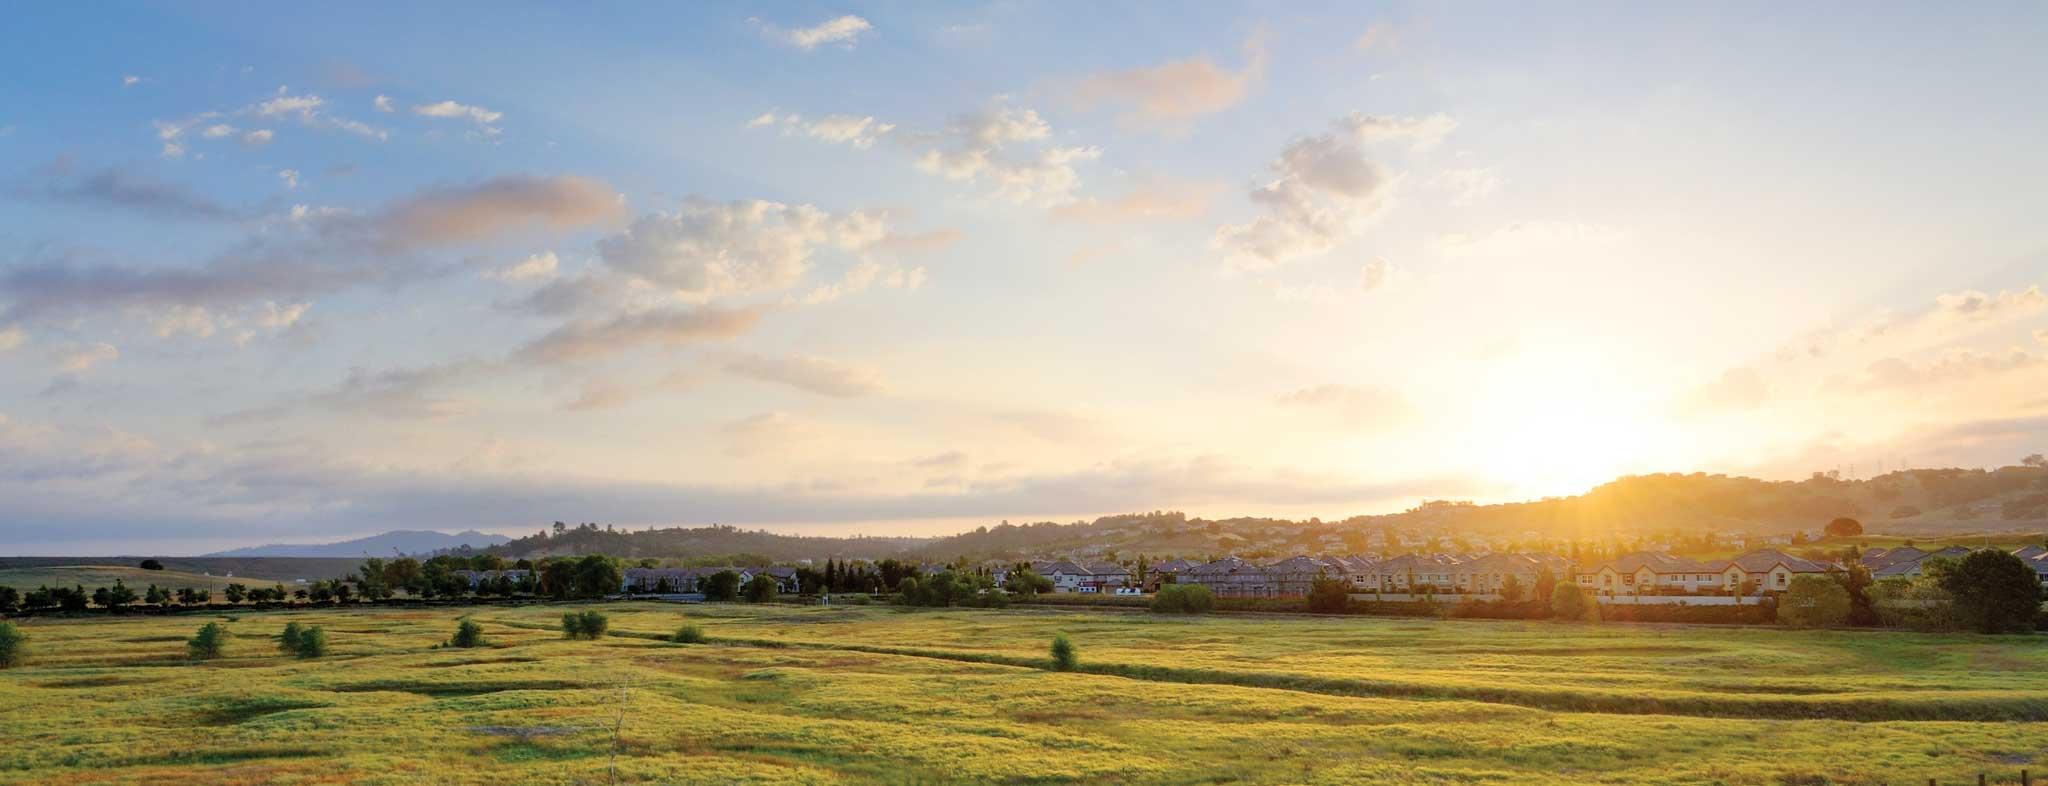  Woodbury, a thoughtfully designed community of 56 new homes - with views of Mount Diablo - is within walking distance of restaurants, shops and the Lafayette Reservoir.